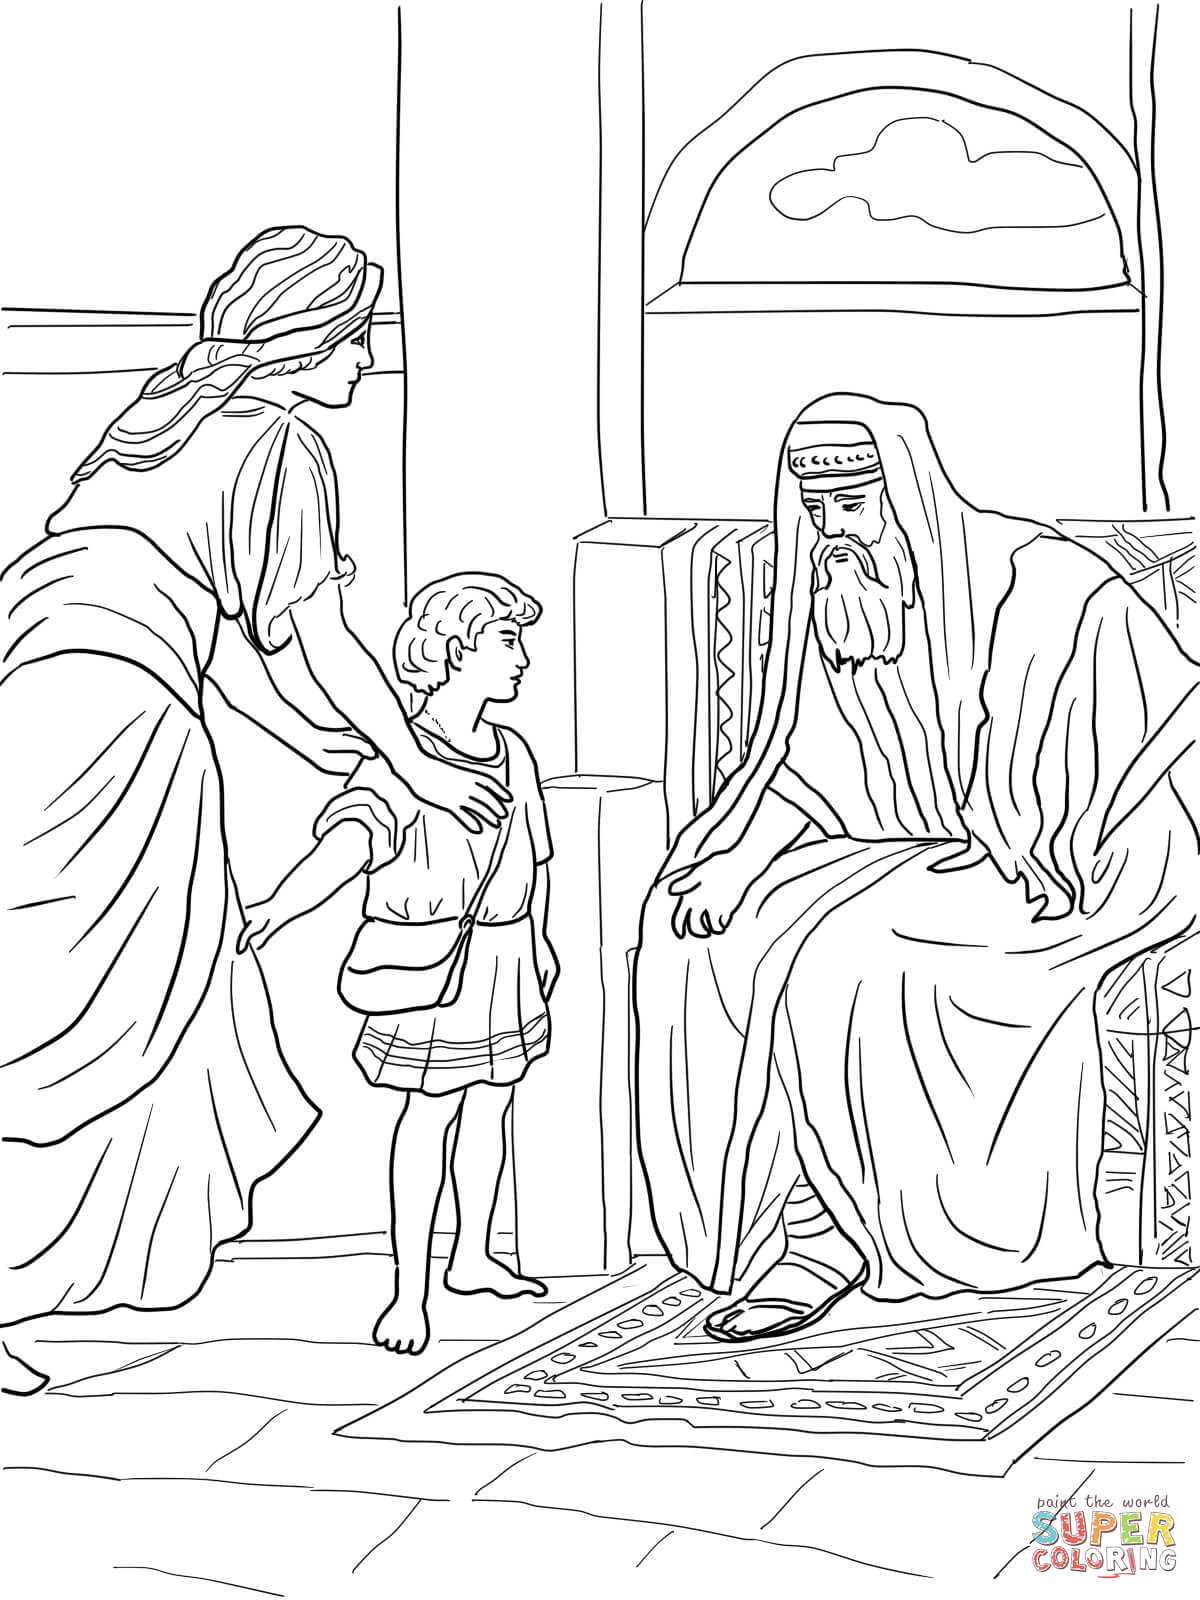 Hannah and Samuel coloring page | Free Printable Coloring Pages